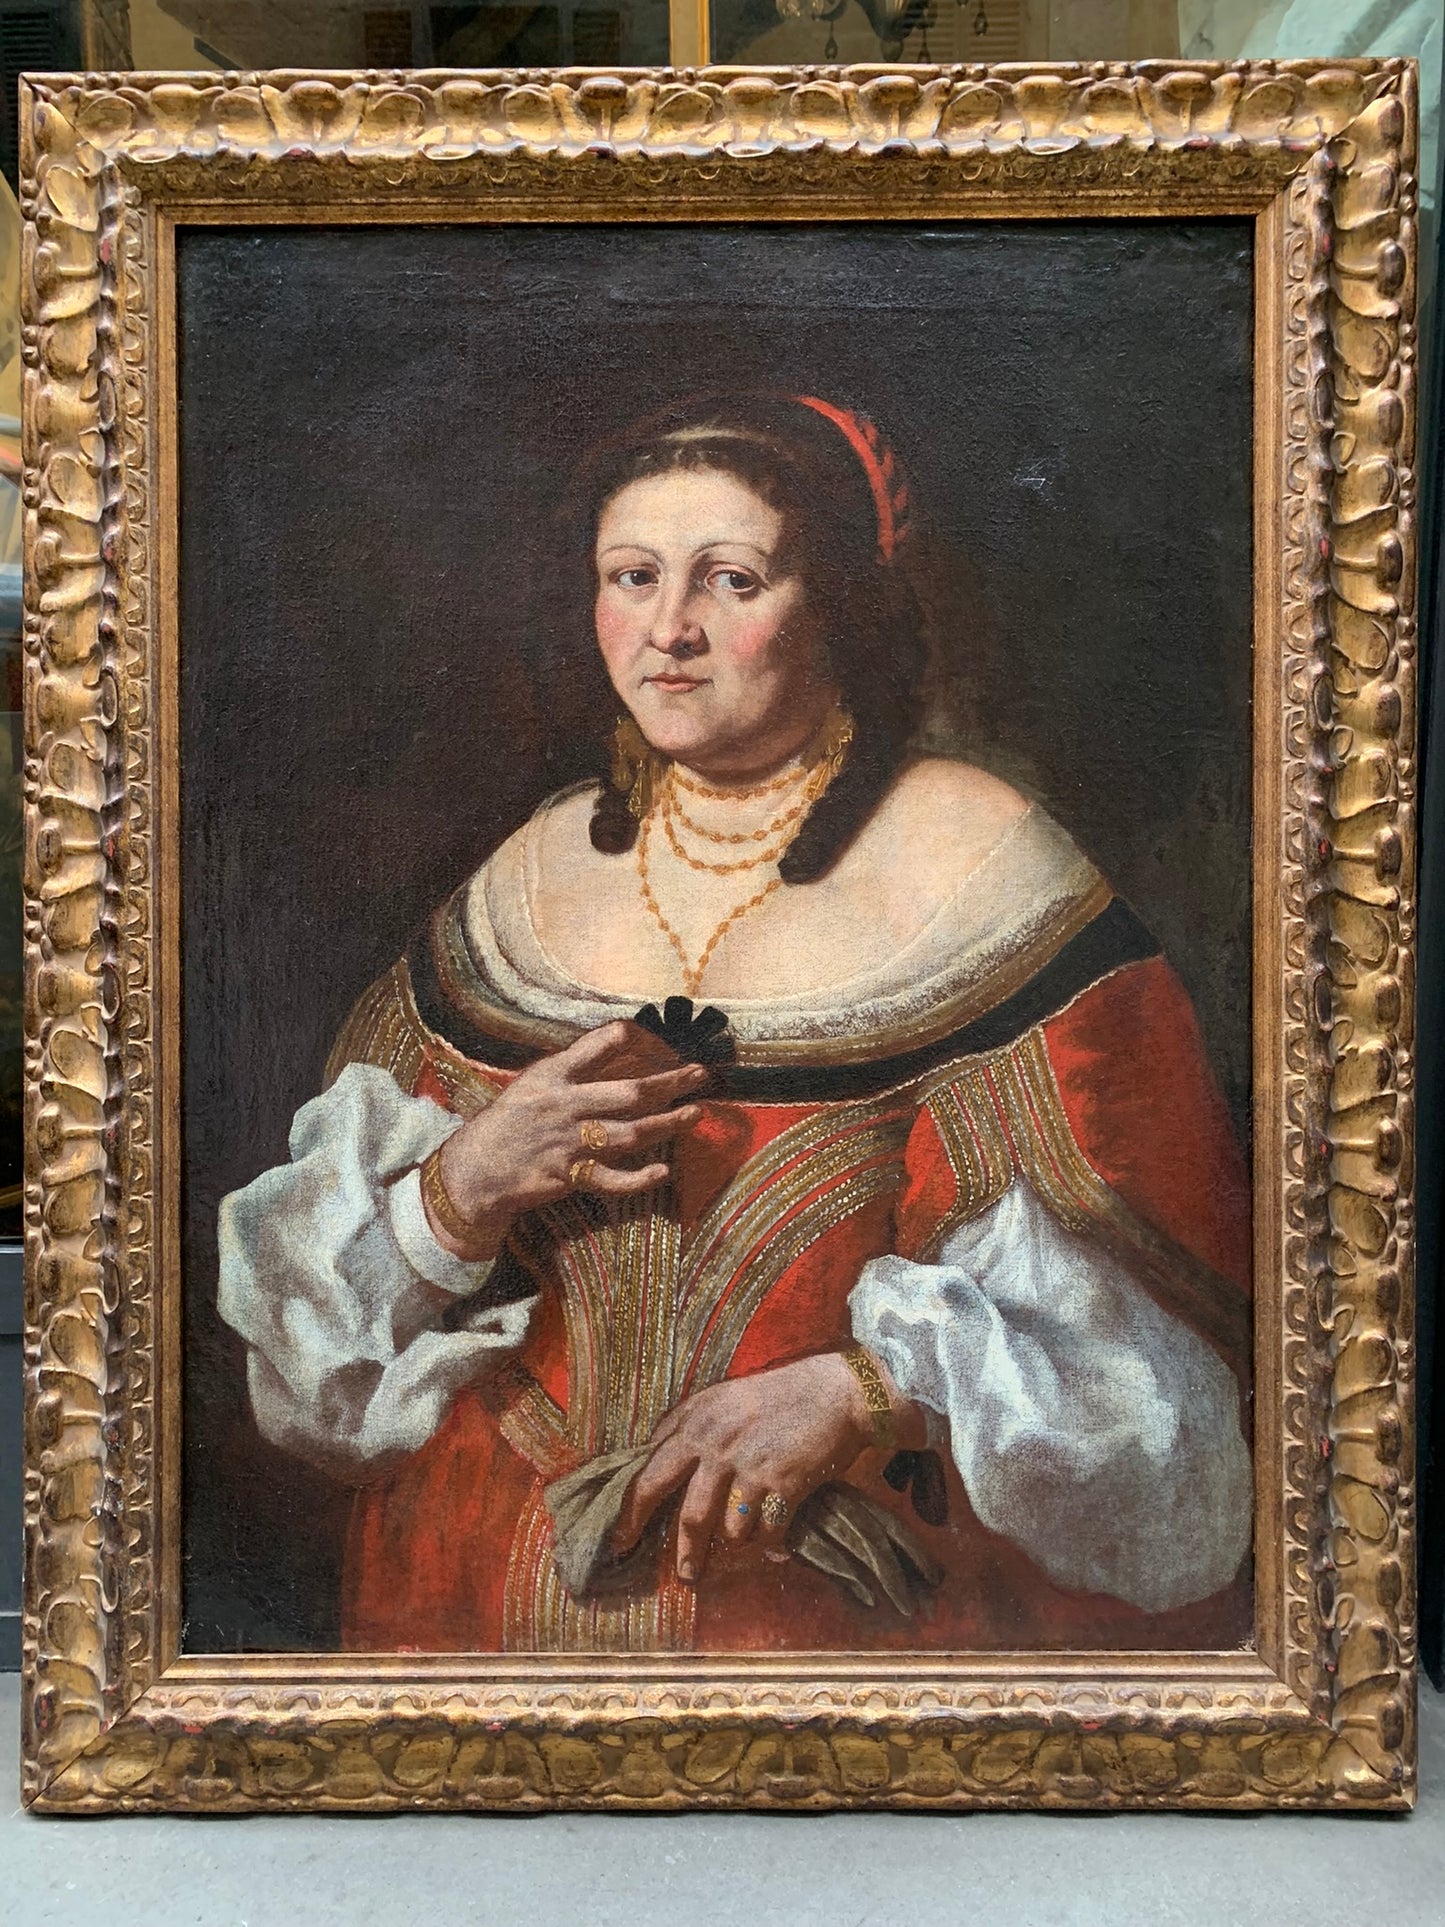 Portrait of a noblewoman. Attributed to Carlo Ceresa. About 1640.